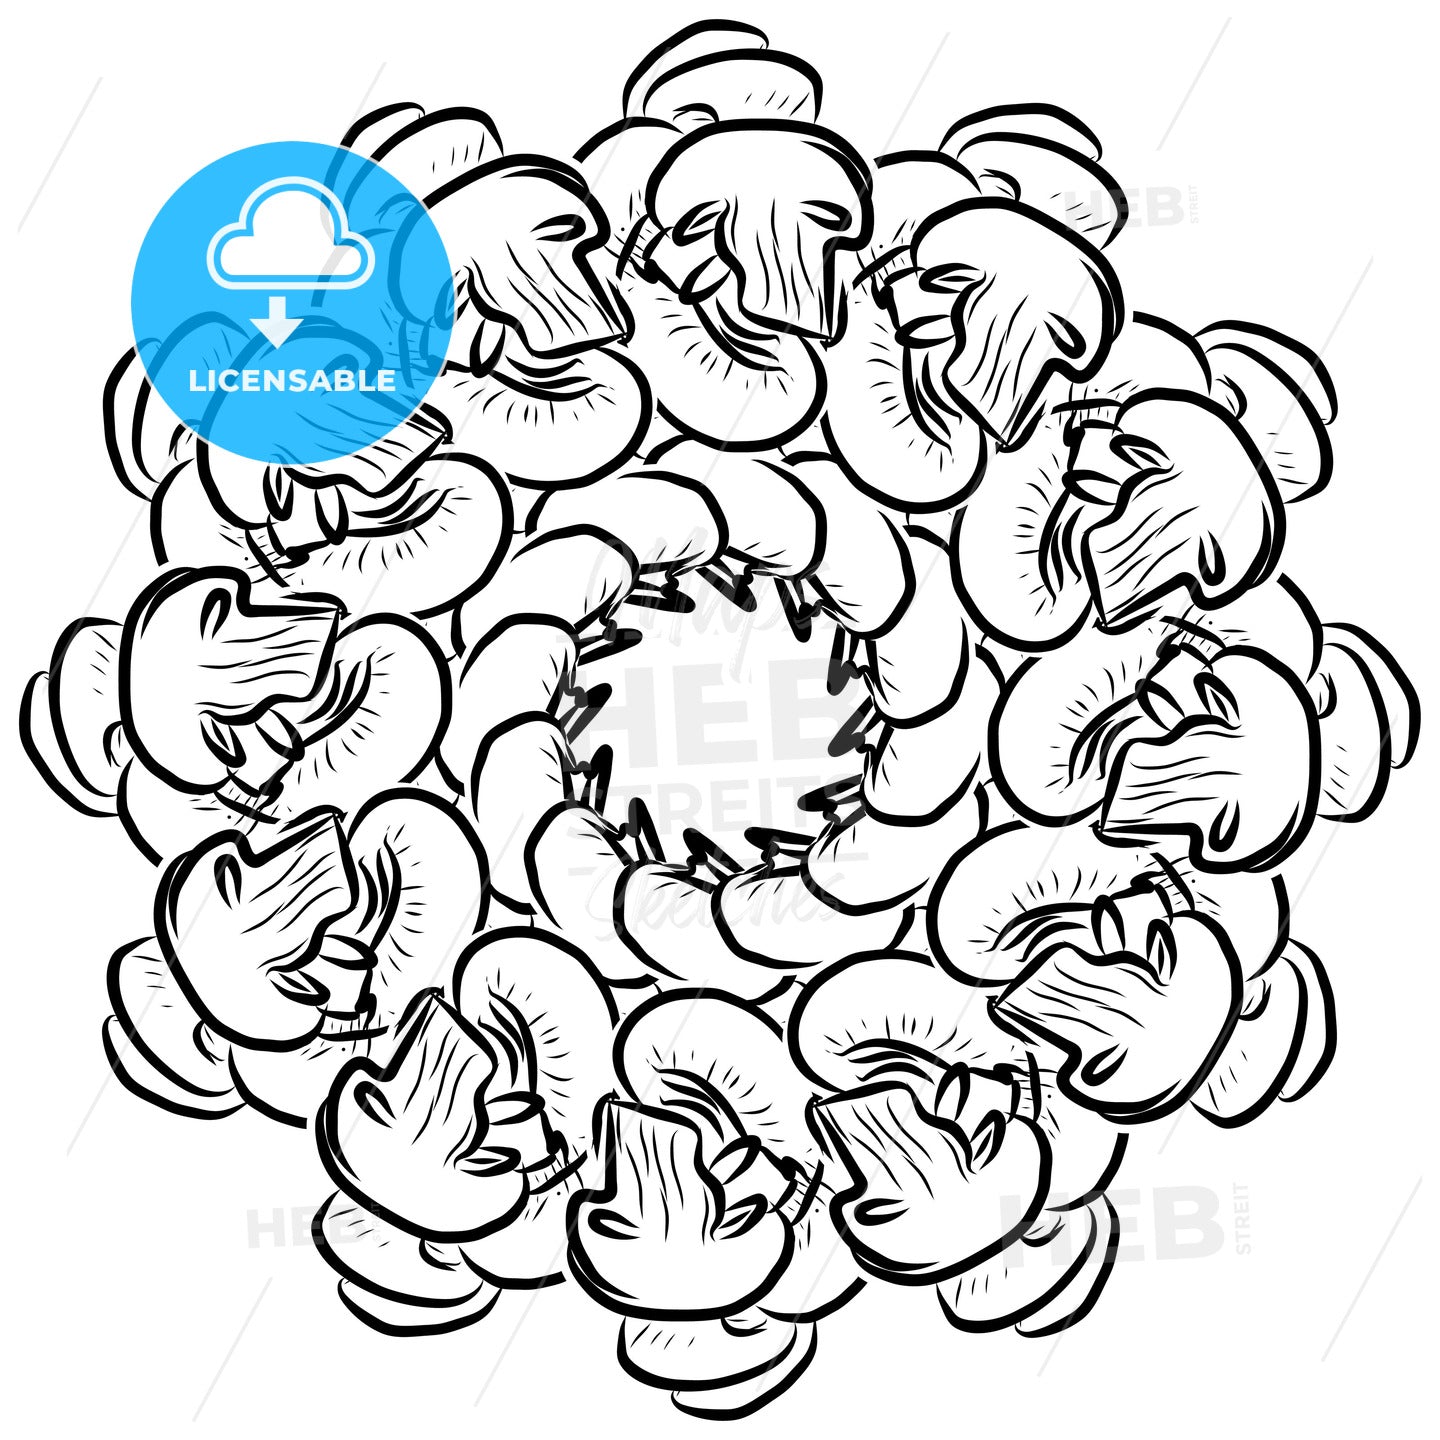 Outline sketch of Mushrooms arranged in a circle – instant download